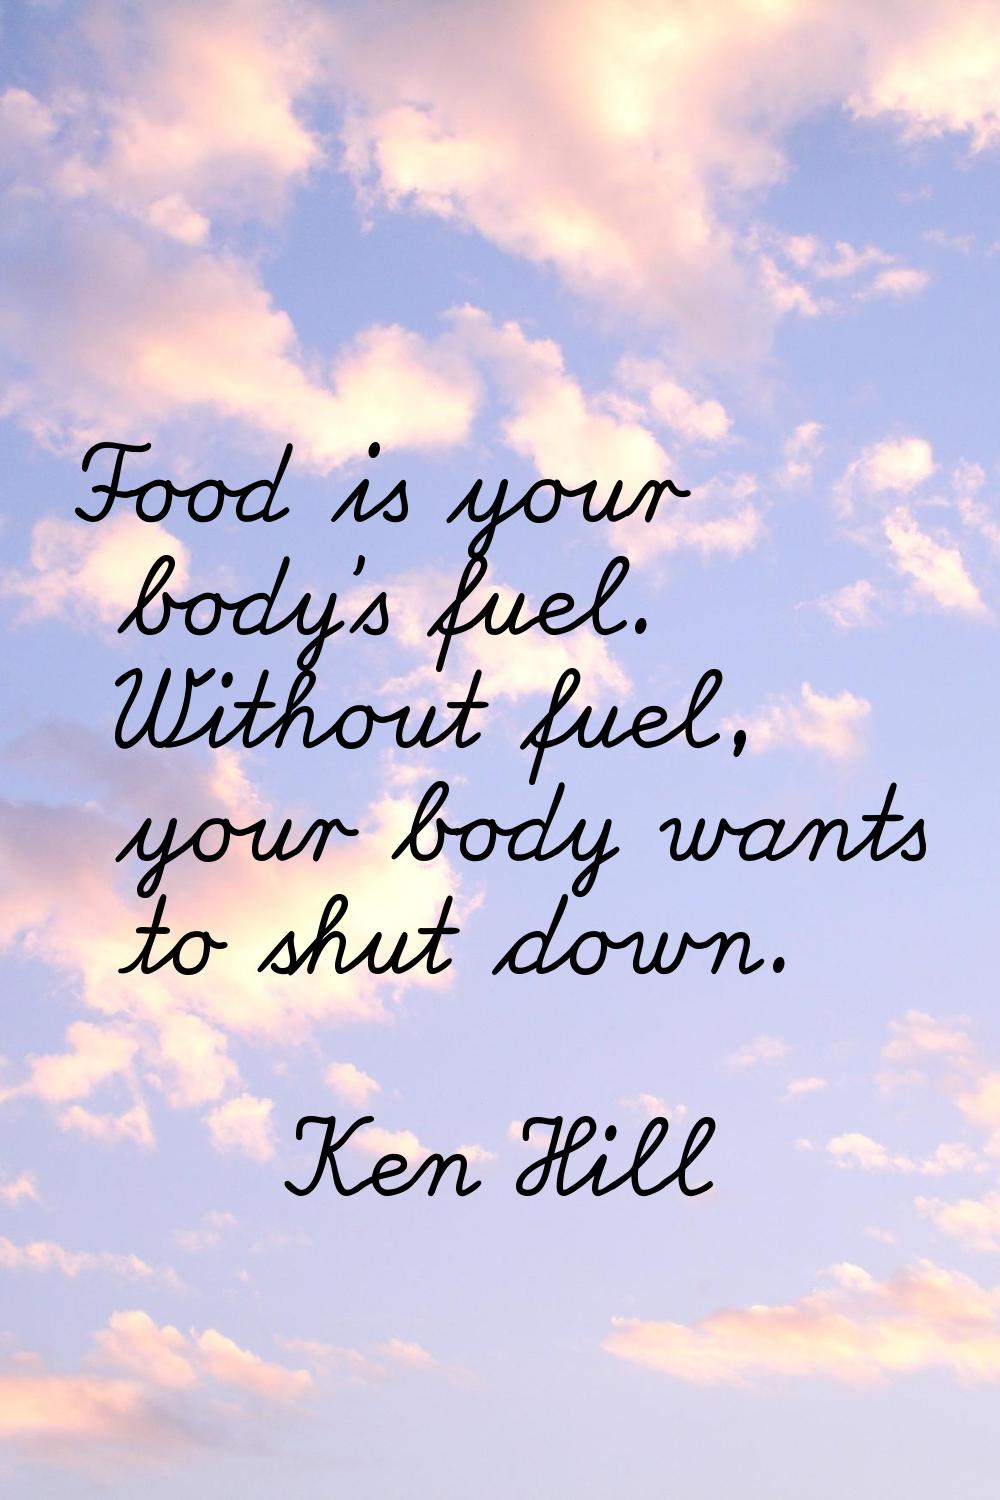 Food is your body's fuel. Without fuel, your body wants to shut down.